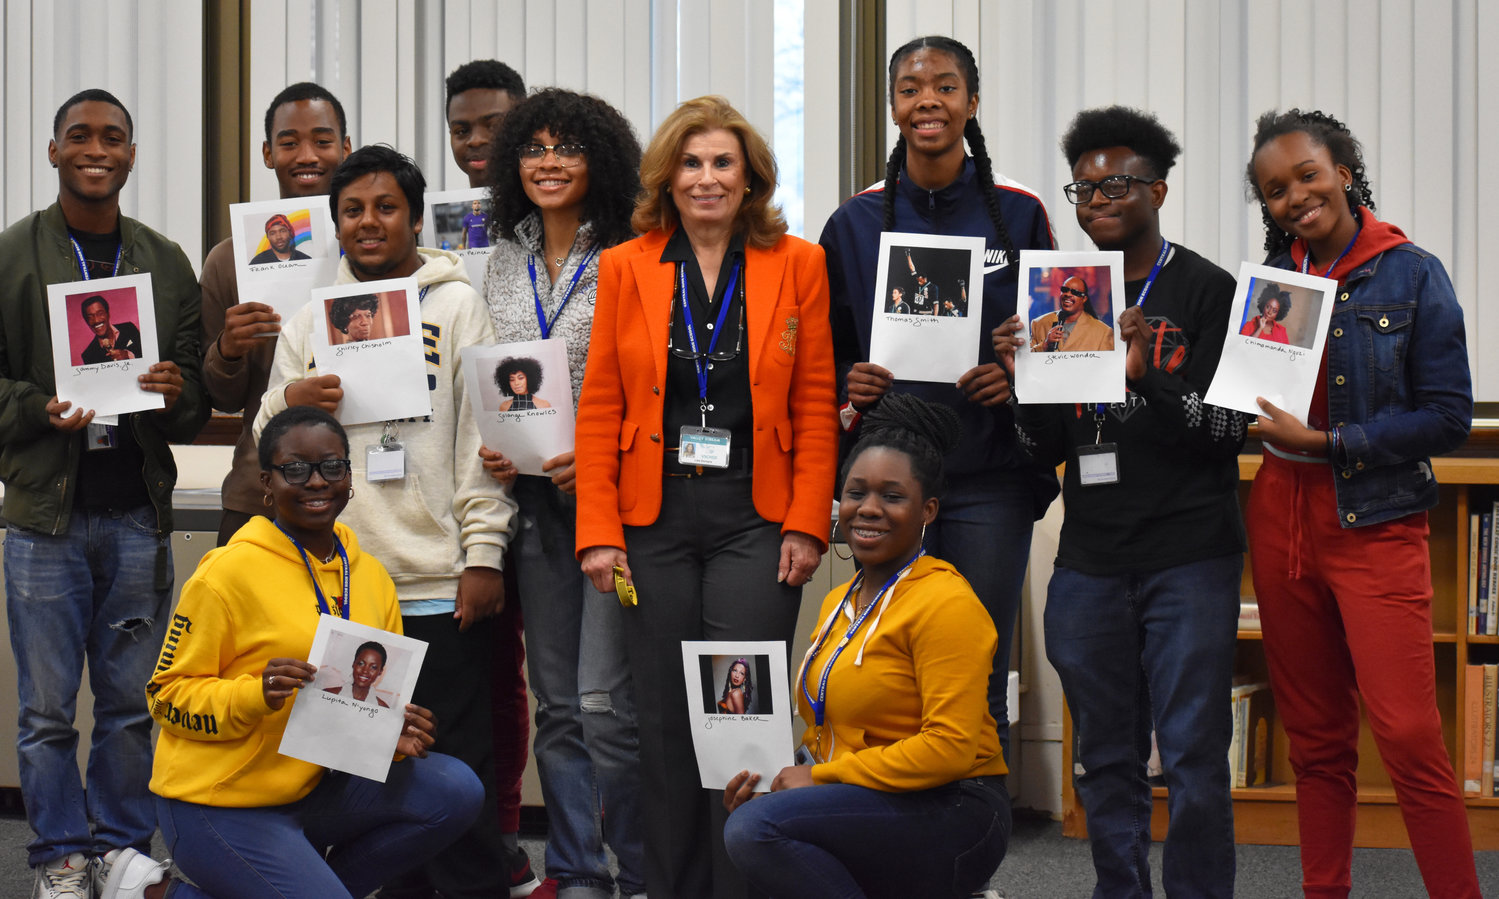 Ten Central High School students gathered in the school library on Feb. 13 to give presentations on black figures that inspire them. With them, at center, was library Media Specialist Lisa Dichiara.